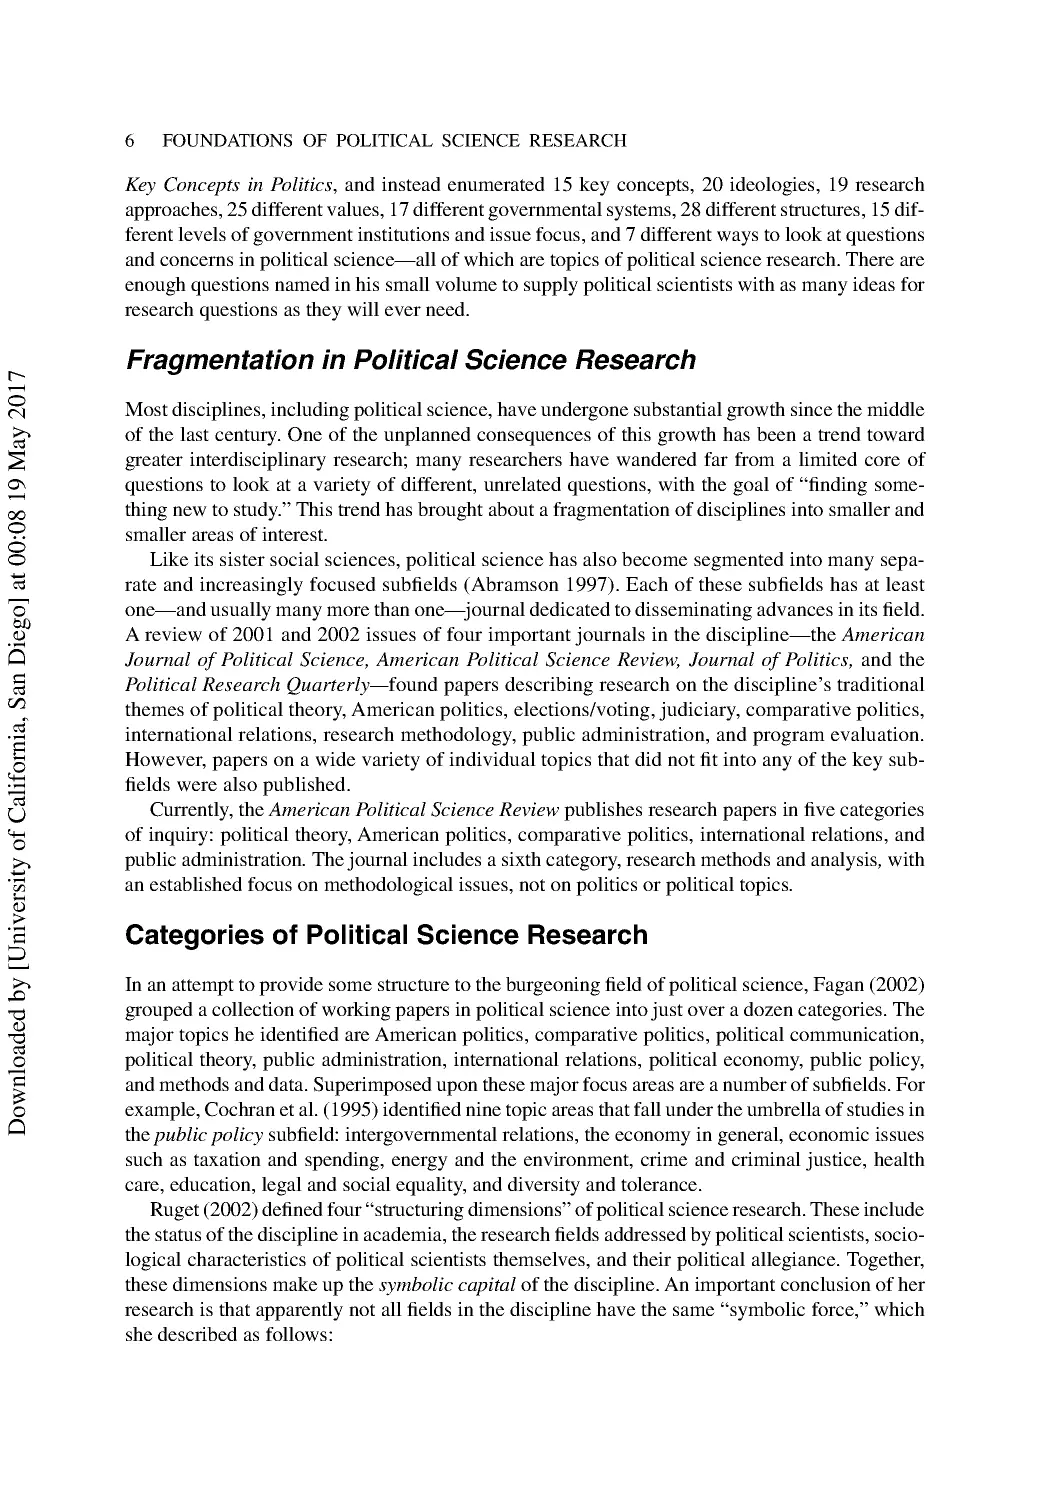 Categories of Political Science Research